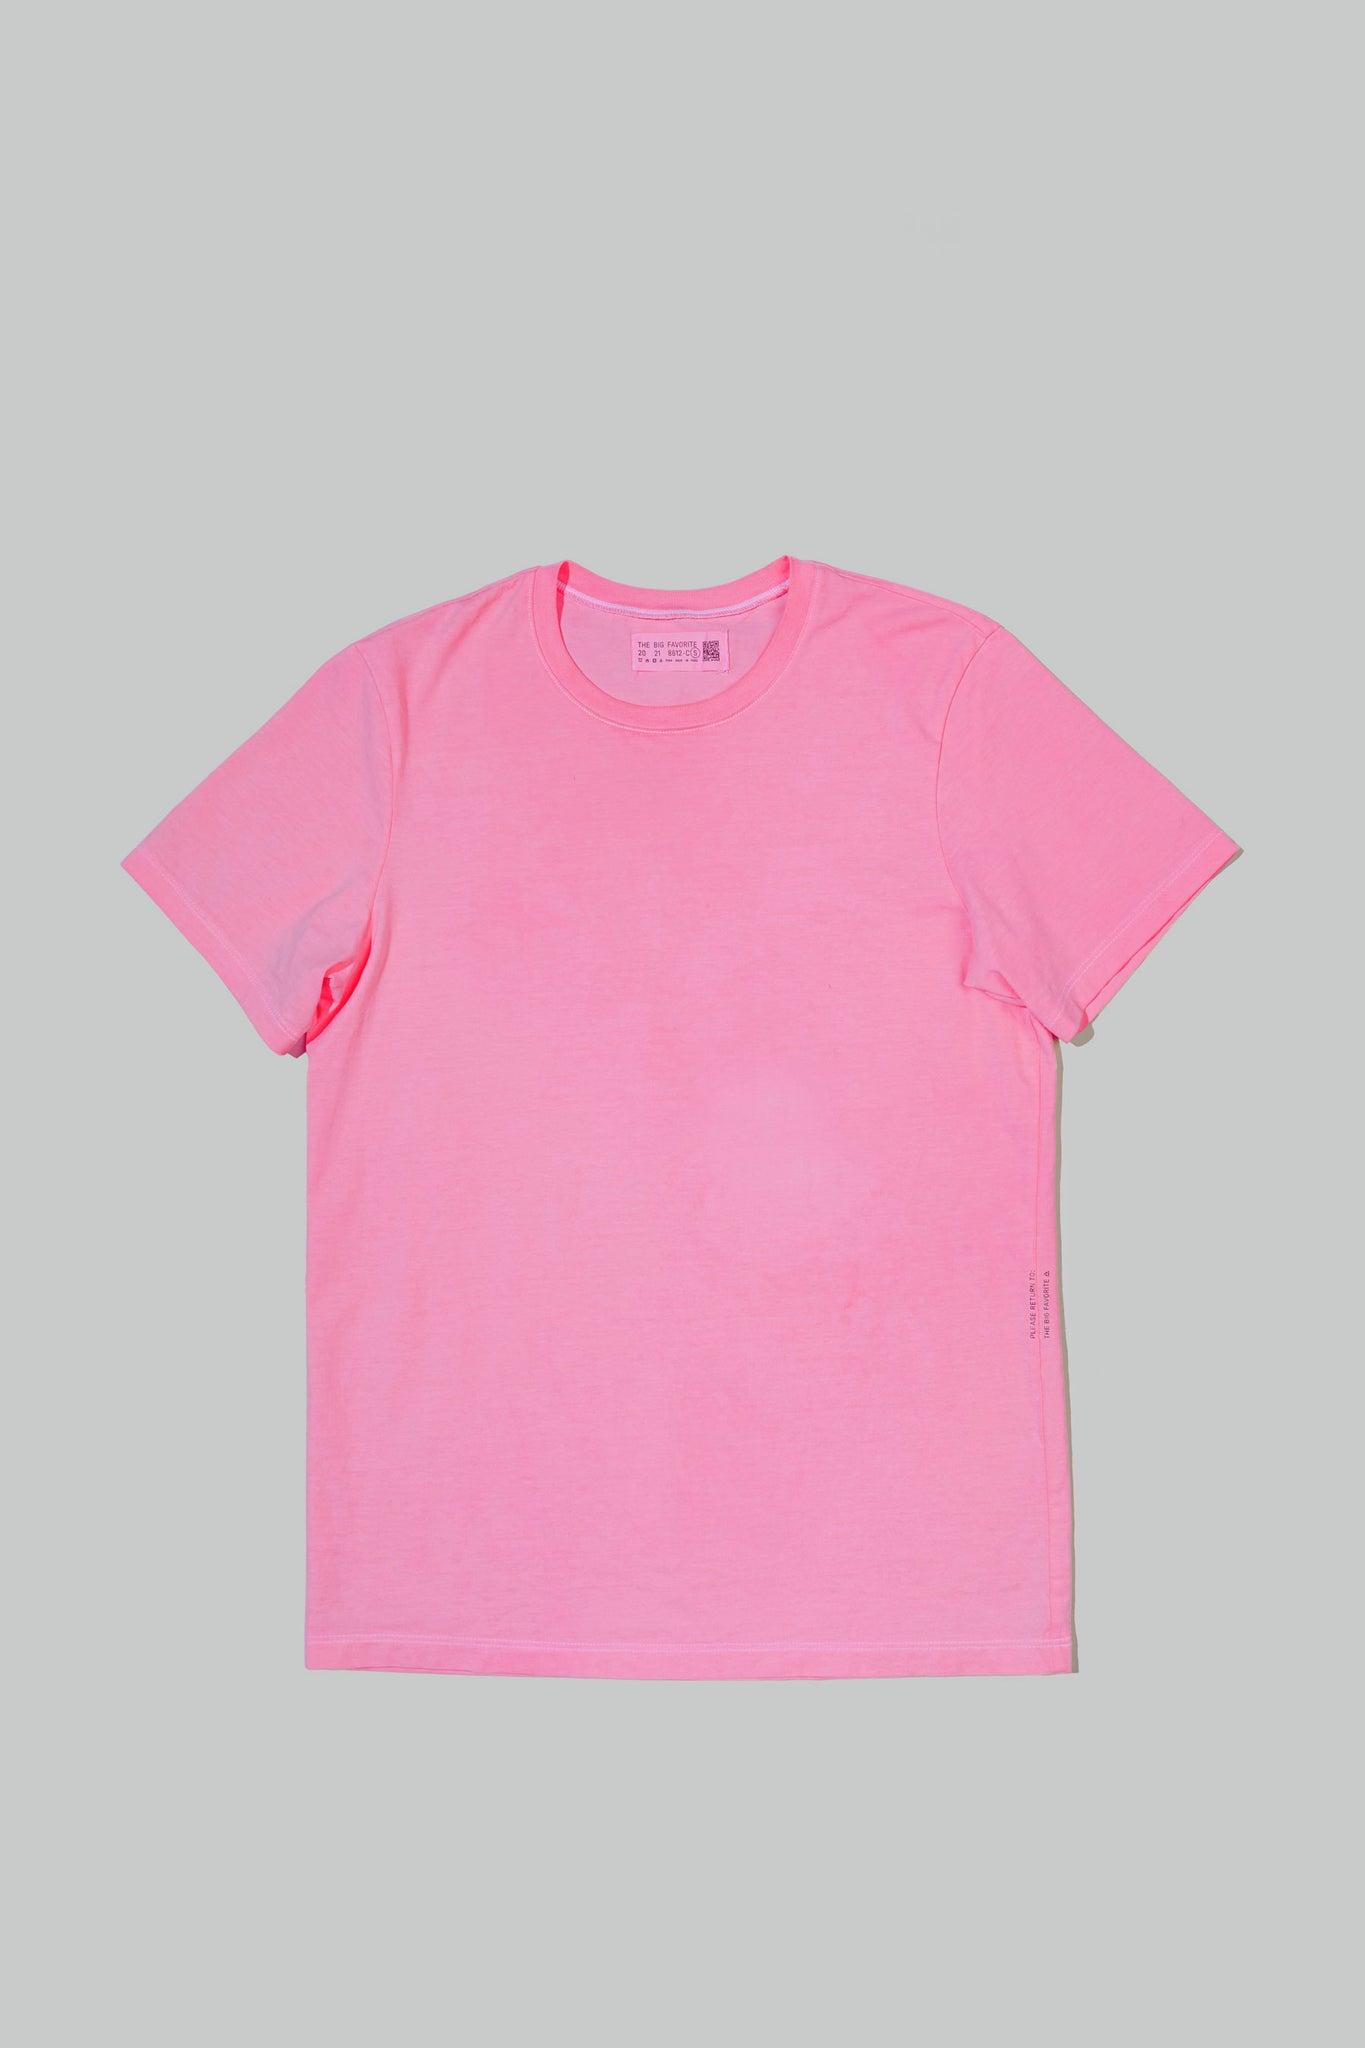 a crewneck in better barbie hot pink laid flat